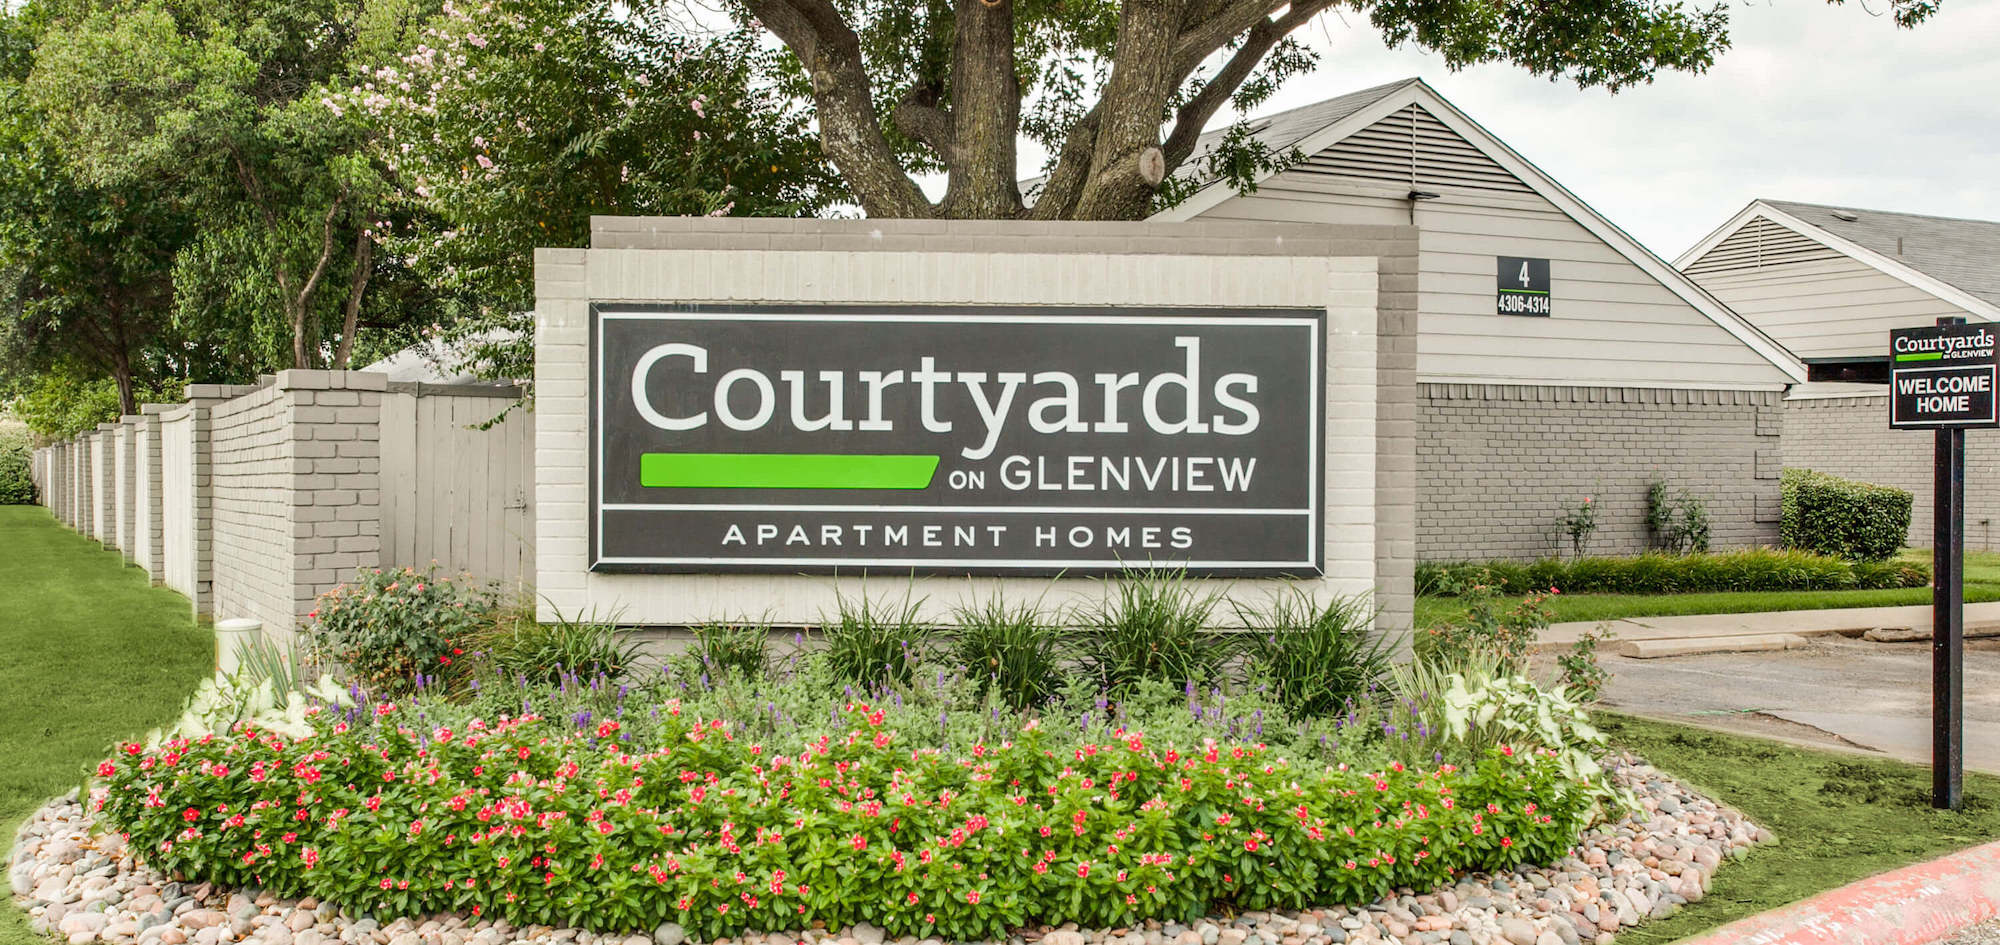 Courtyards on Glenview signage